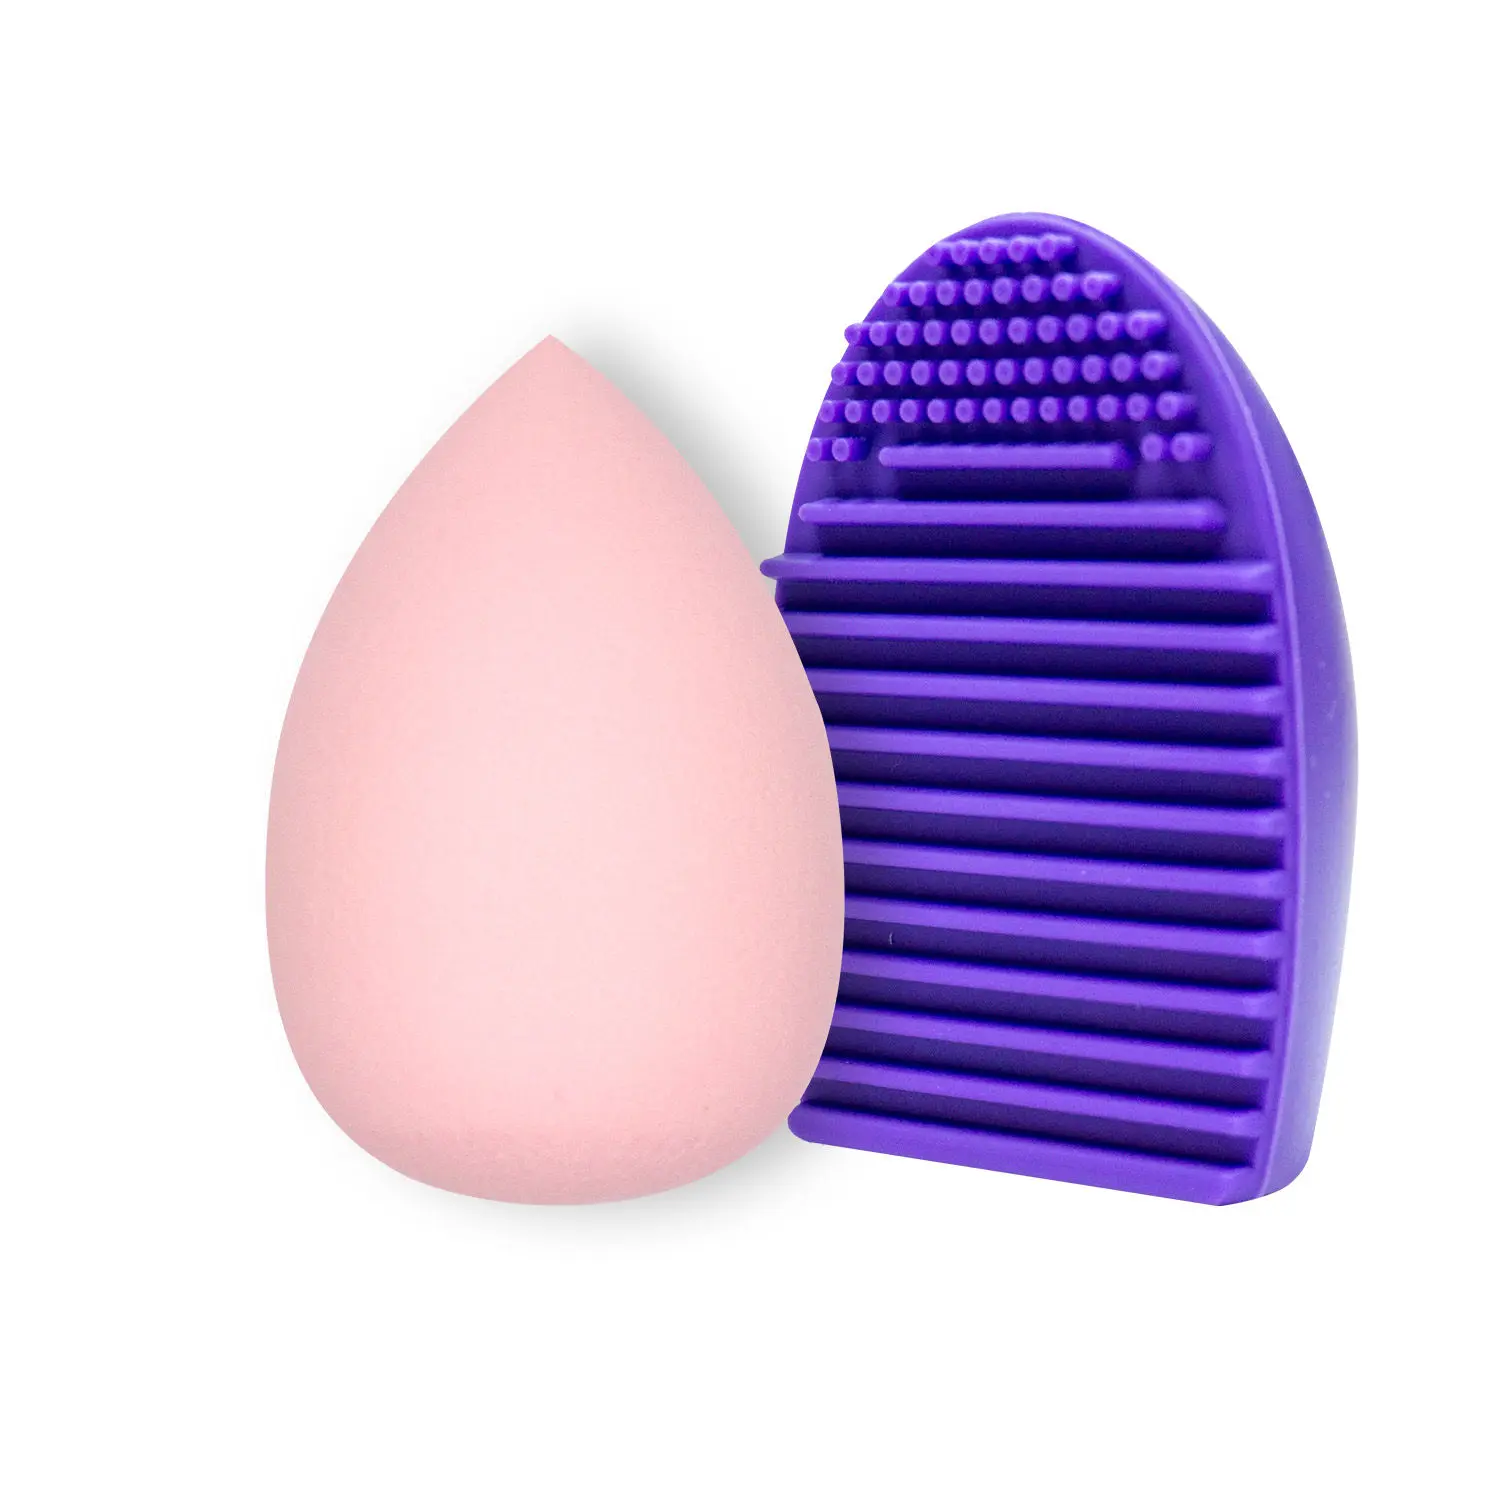 Beautiliss Professional Beauty Blender Makeup Puff Sponge & Silicon Makeup Brush Cleaner set (color may vary)